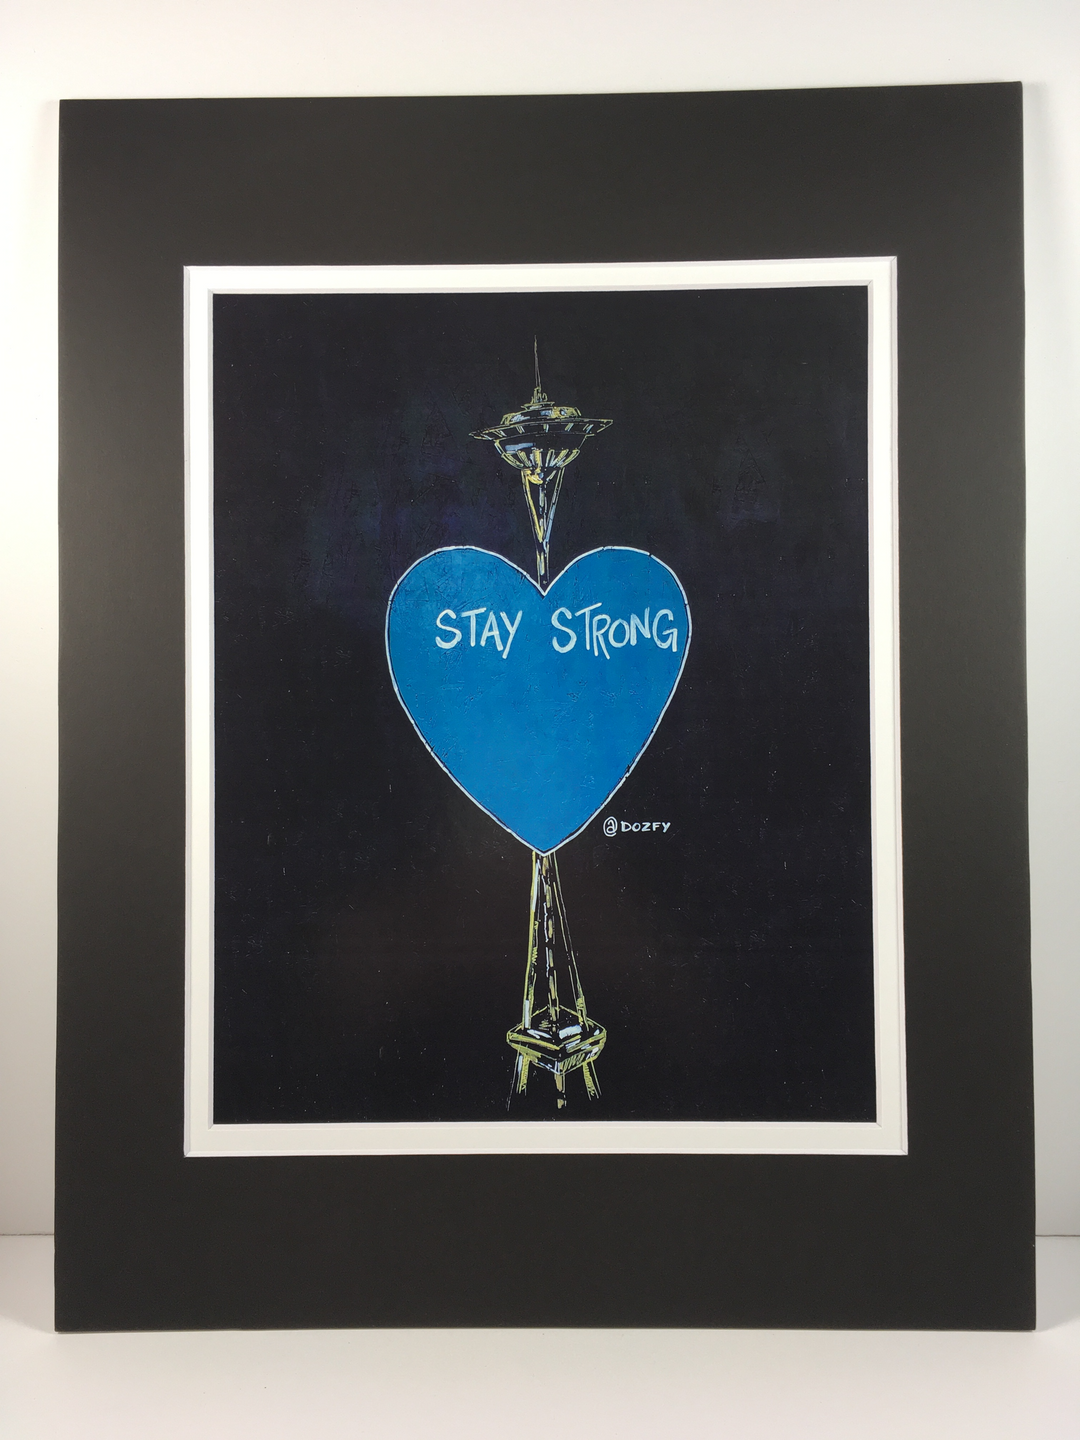 Dozfy "Stay Strong" Matted Print